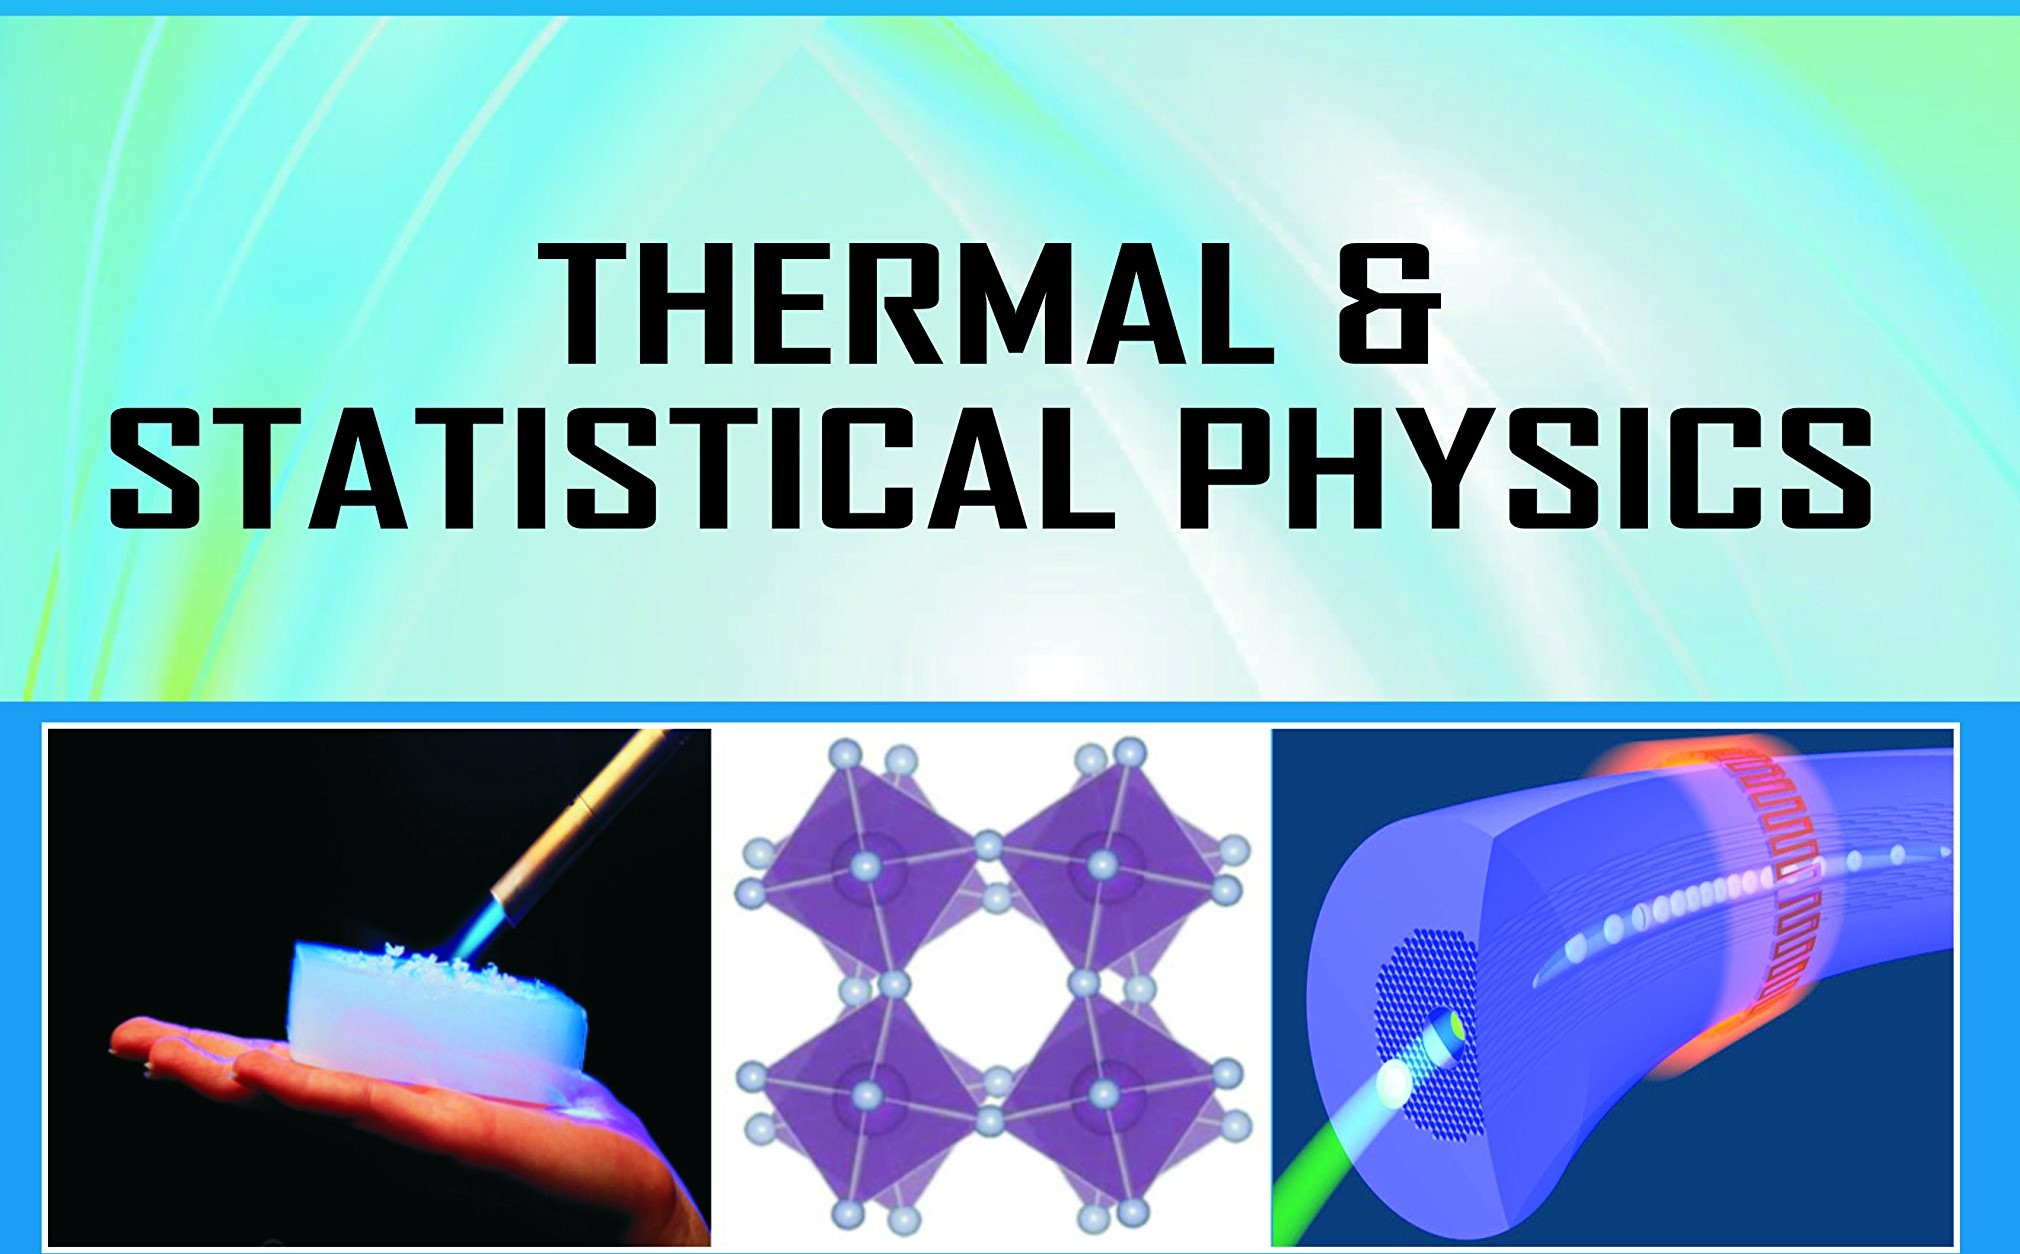 THERMAL AND STATISTICAL PHYSICS